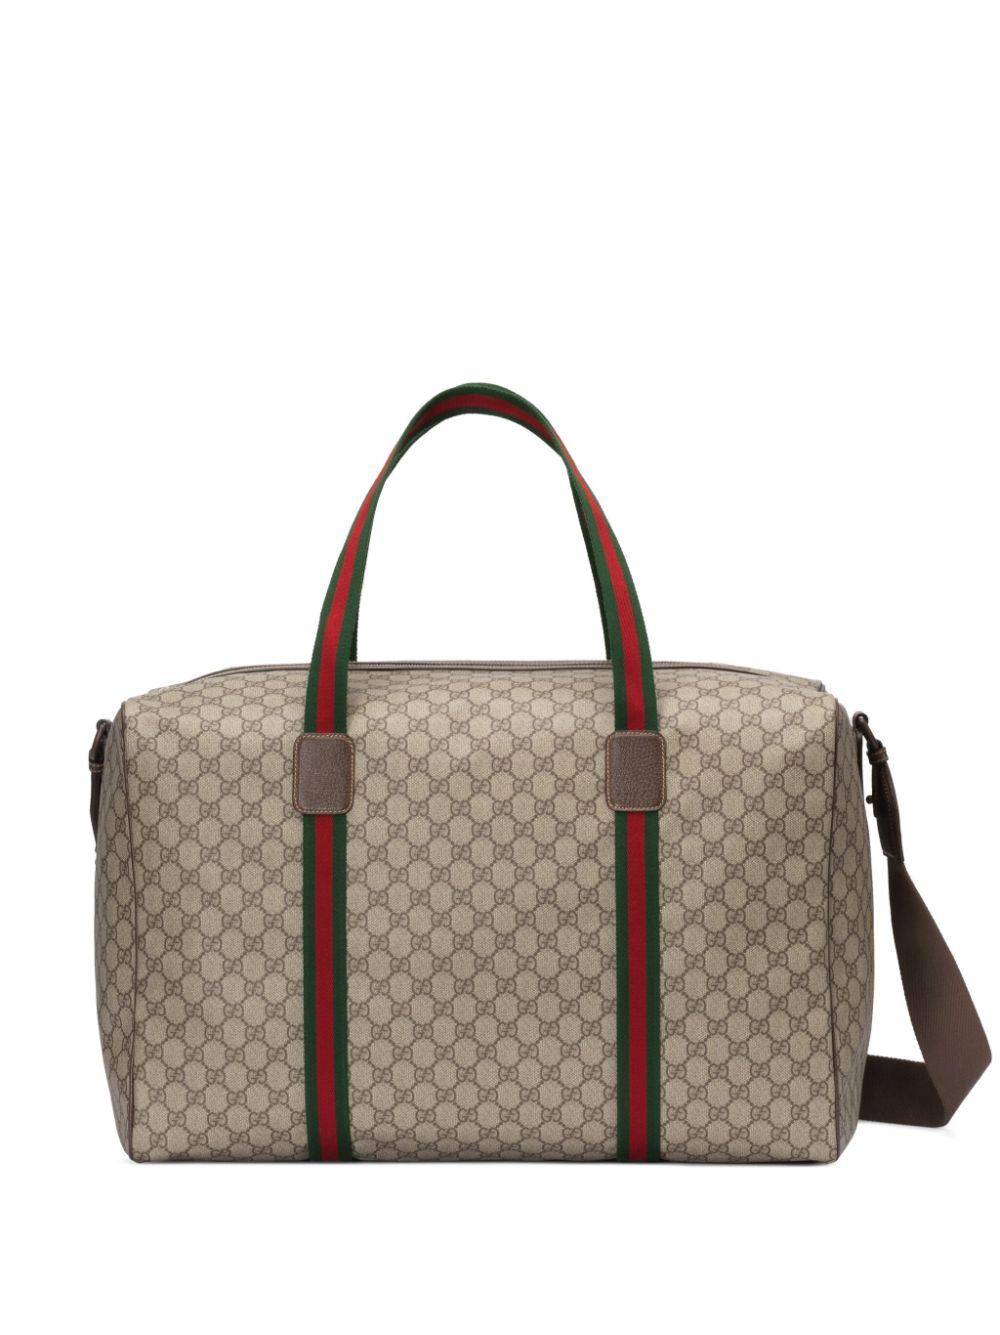  Gucci Duffle Brown Signature Guccissima Large Canvas Leather Travel  Luggage NEW